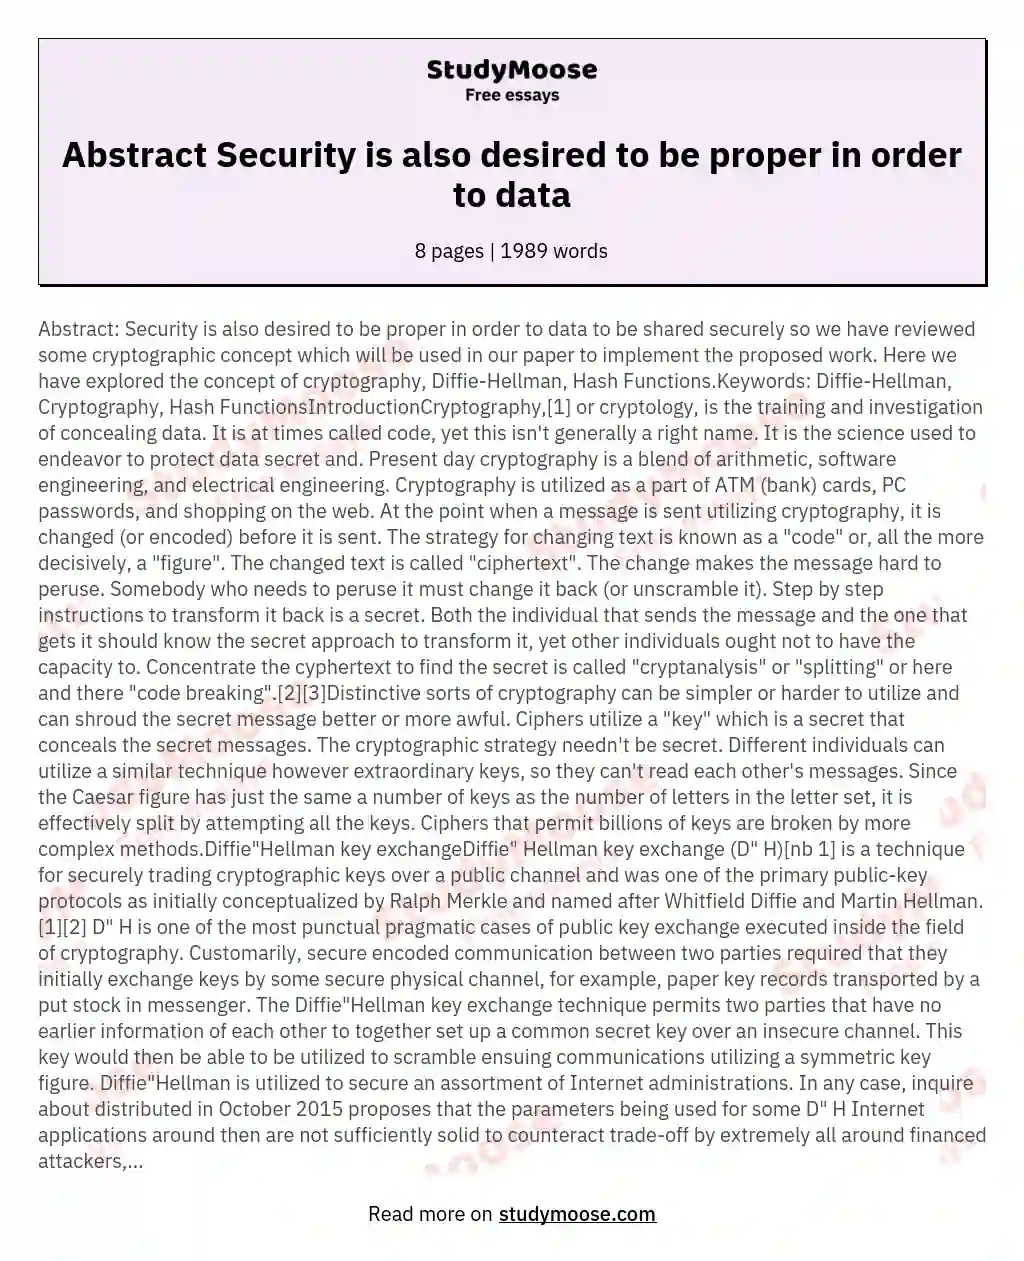 Abstract Security is also desired to be proper in order to data essay